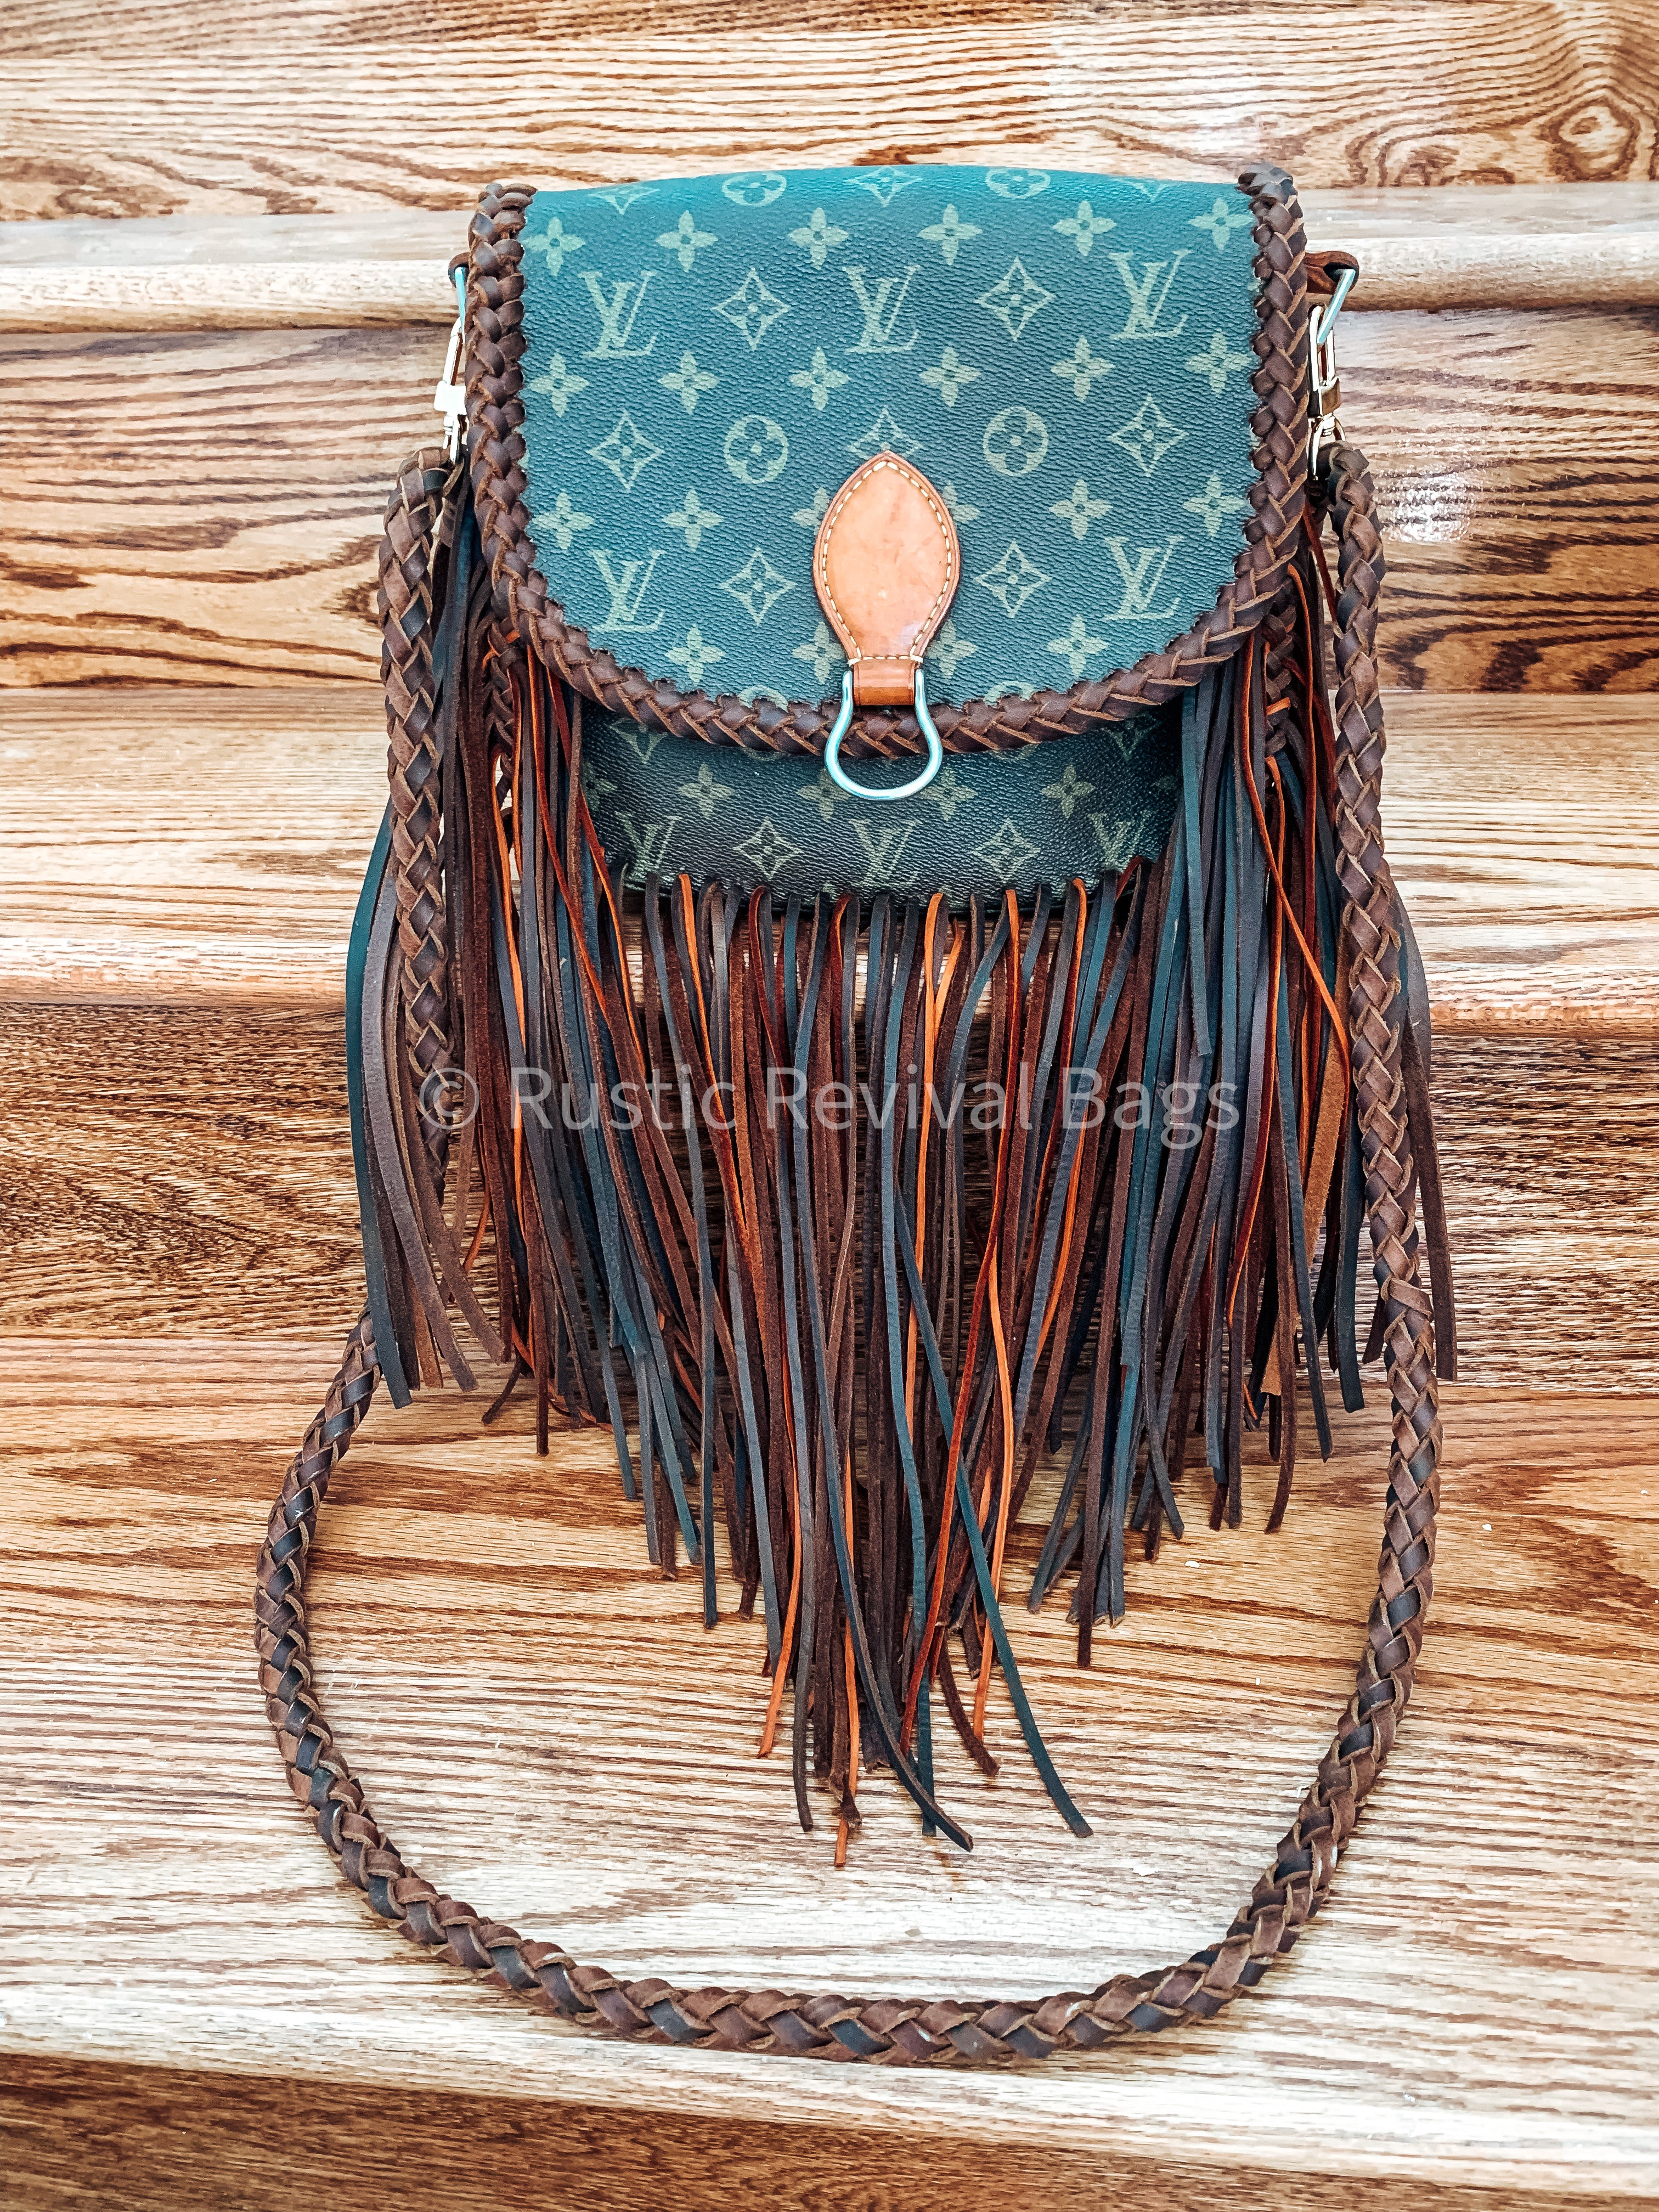 Authentic Louis Vuitton Small Handbag for Sale in Odessa, TX